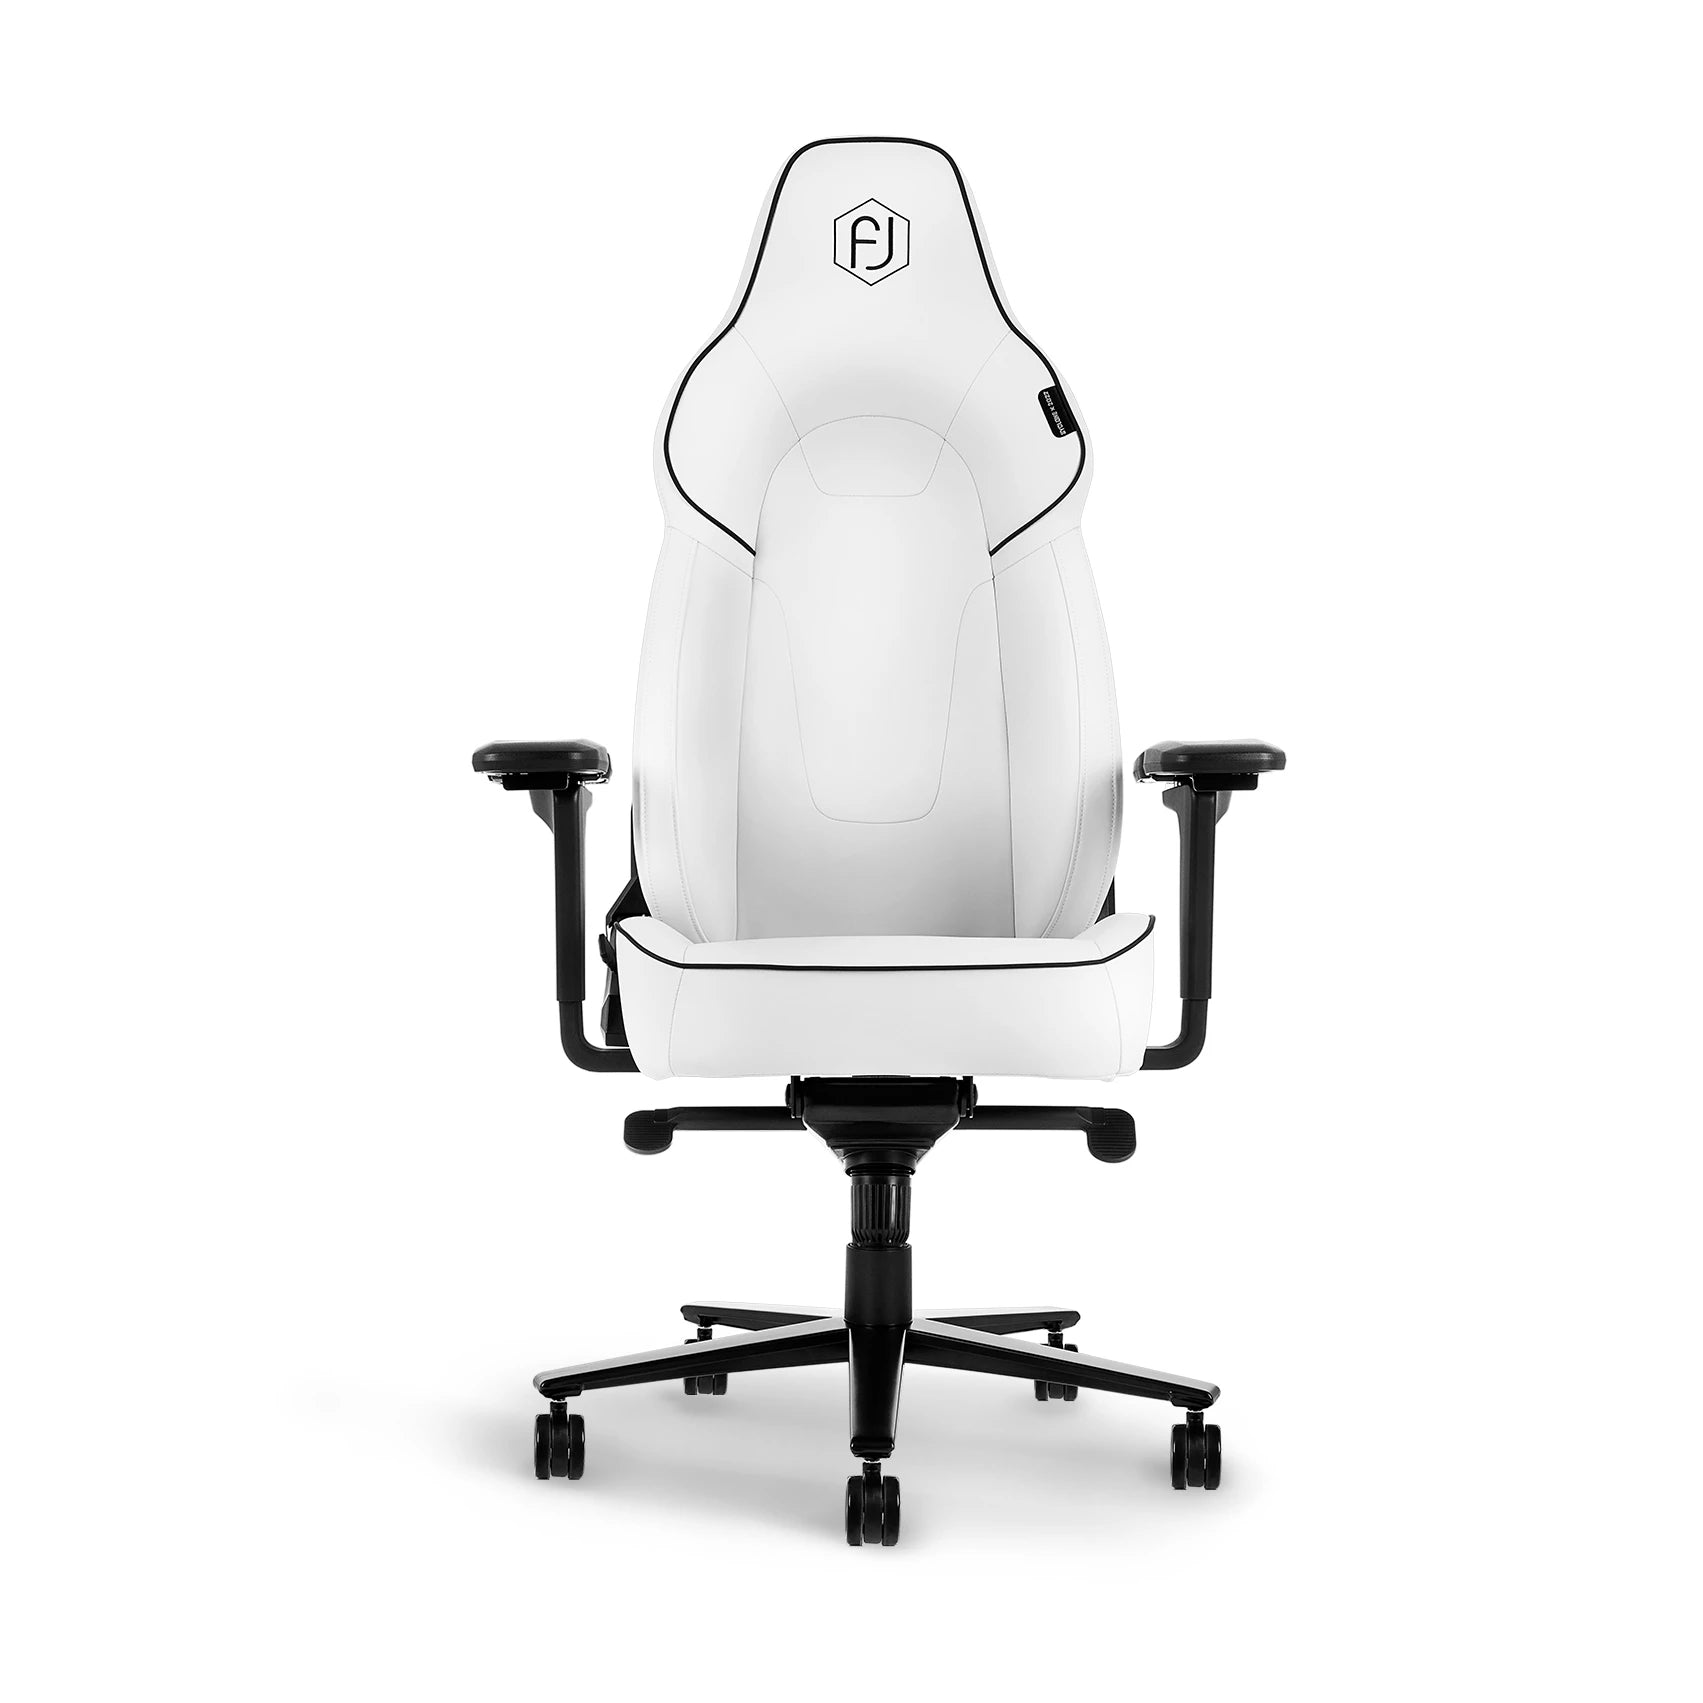 Frontal view of a white ergonomic gaming chair with black detailing and brand emblem.